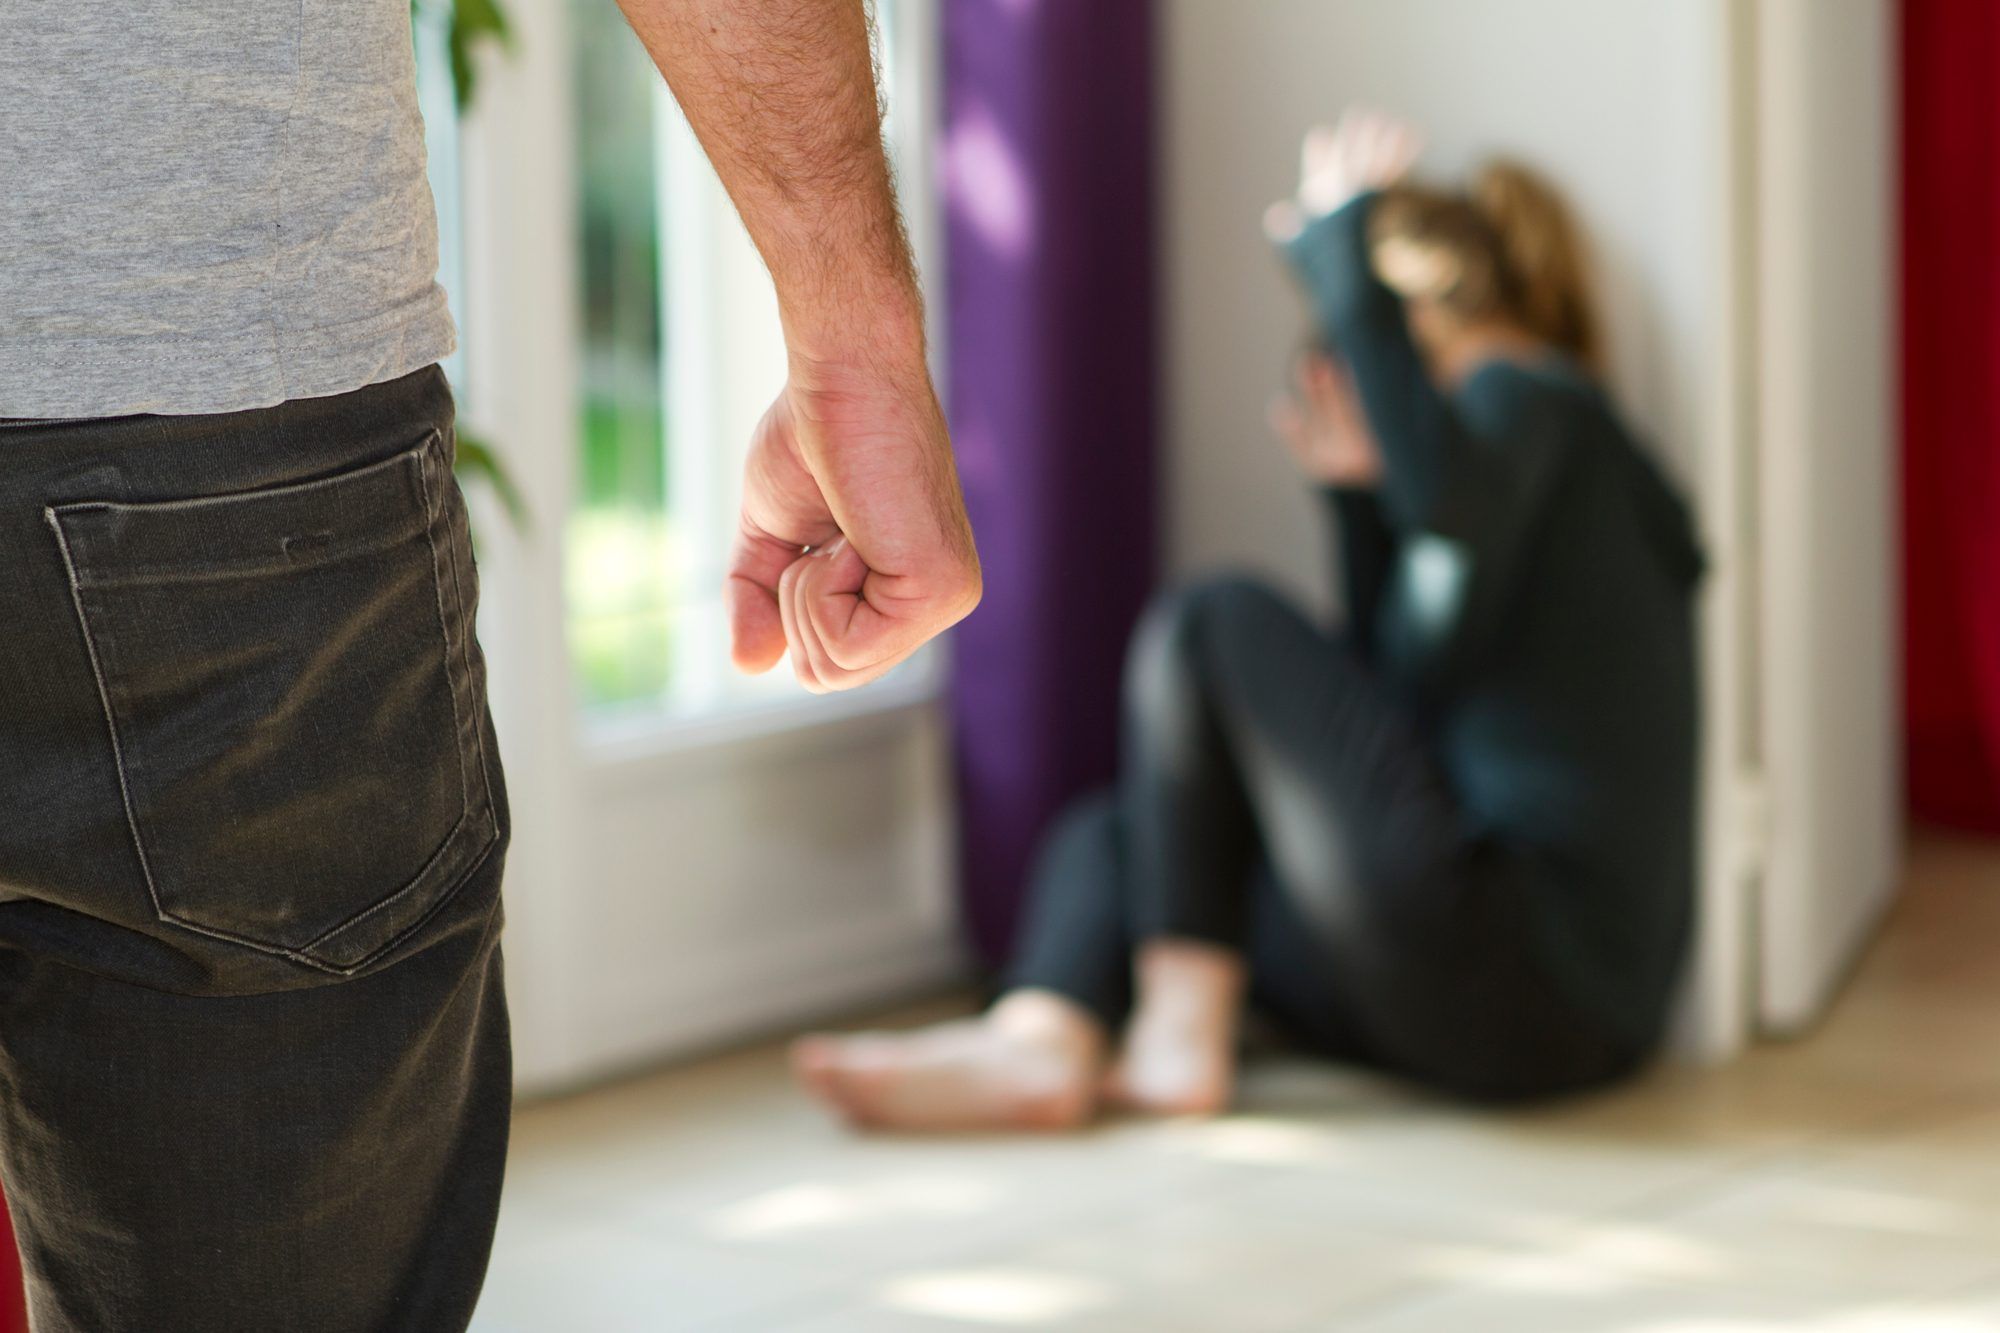 ‘Coercive Control’ Domestic Abuse Could Become a Crime in Canada